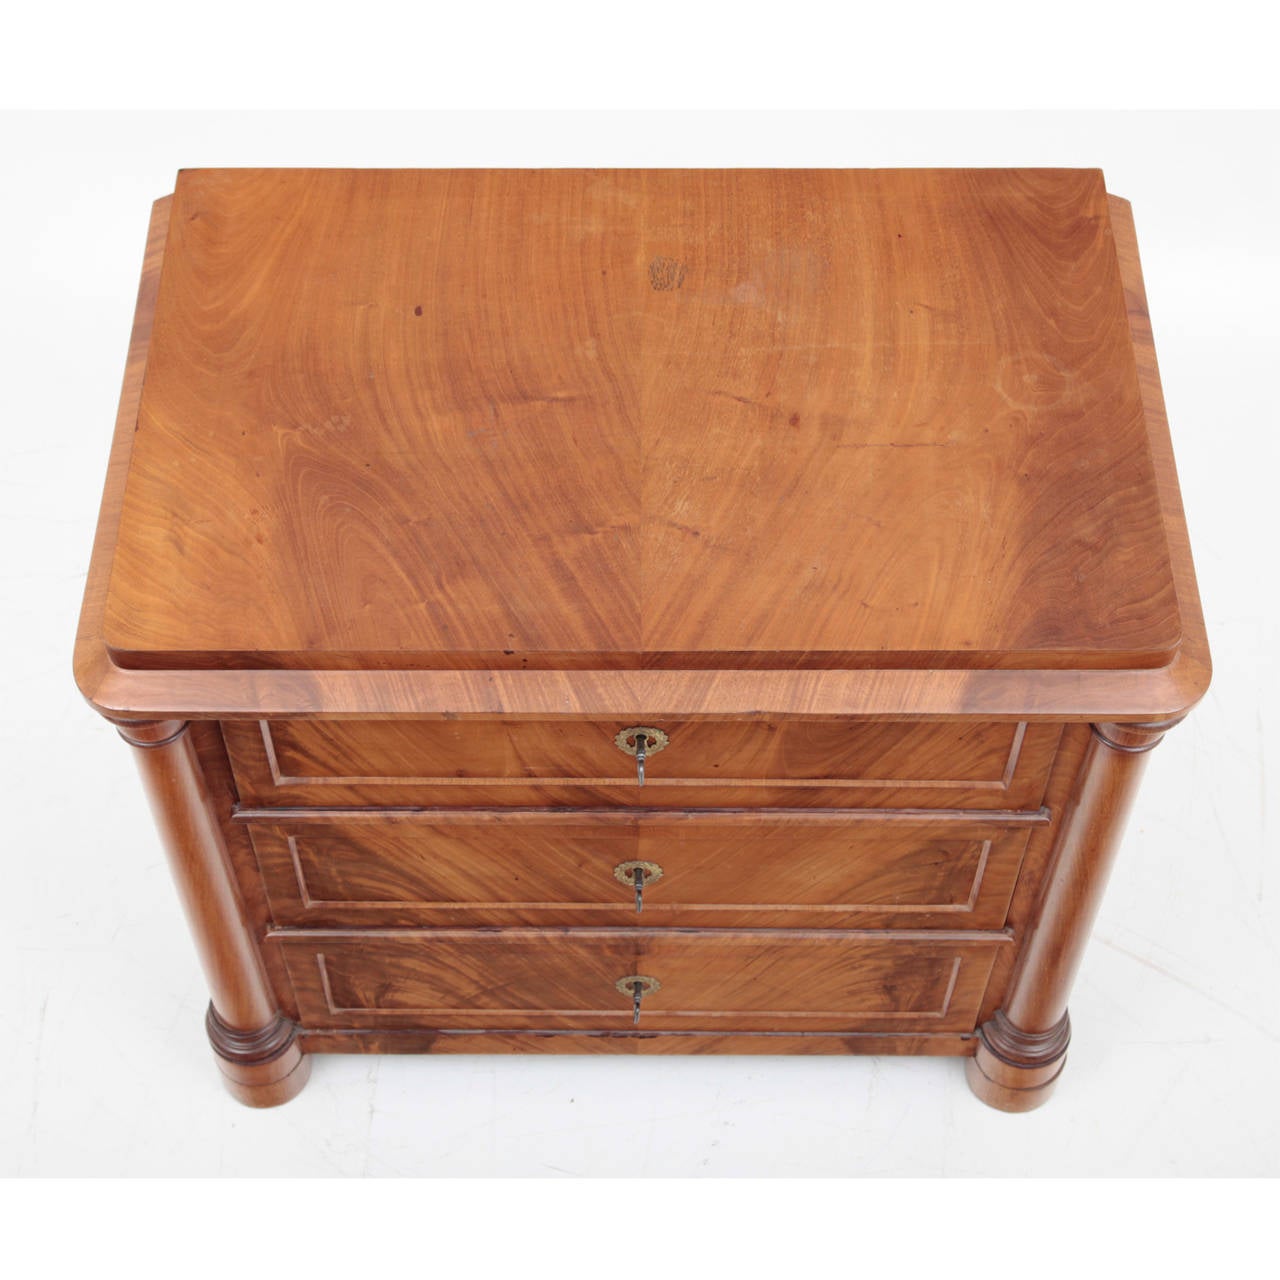 Wood Biedermeier Chest of Drawers from 1820 / 1830.